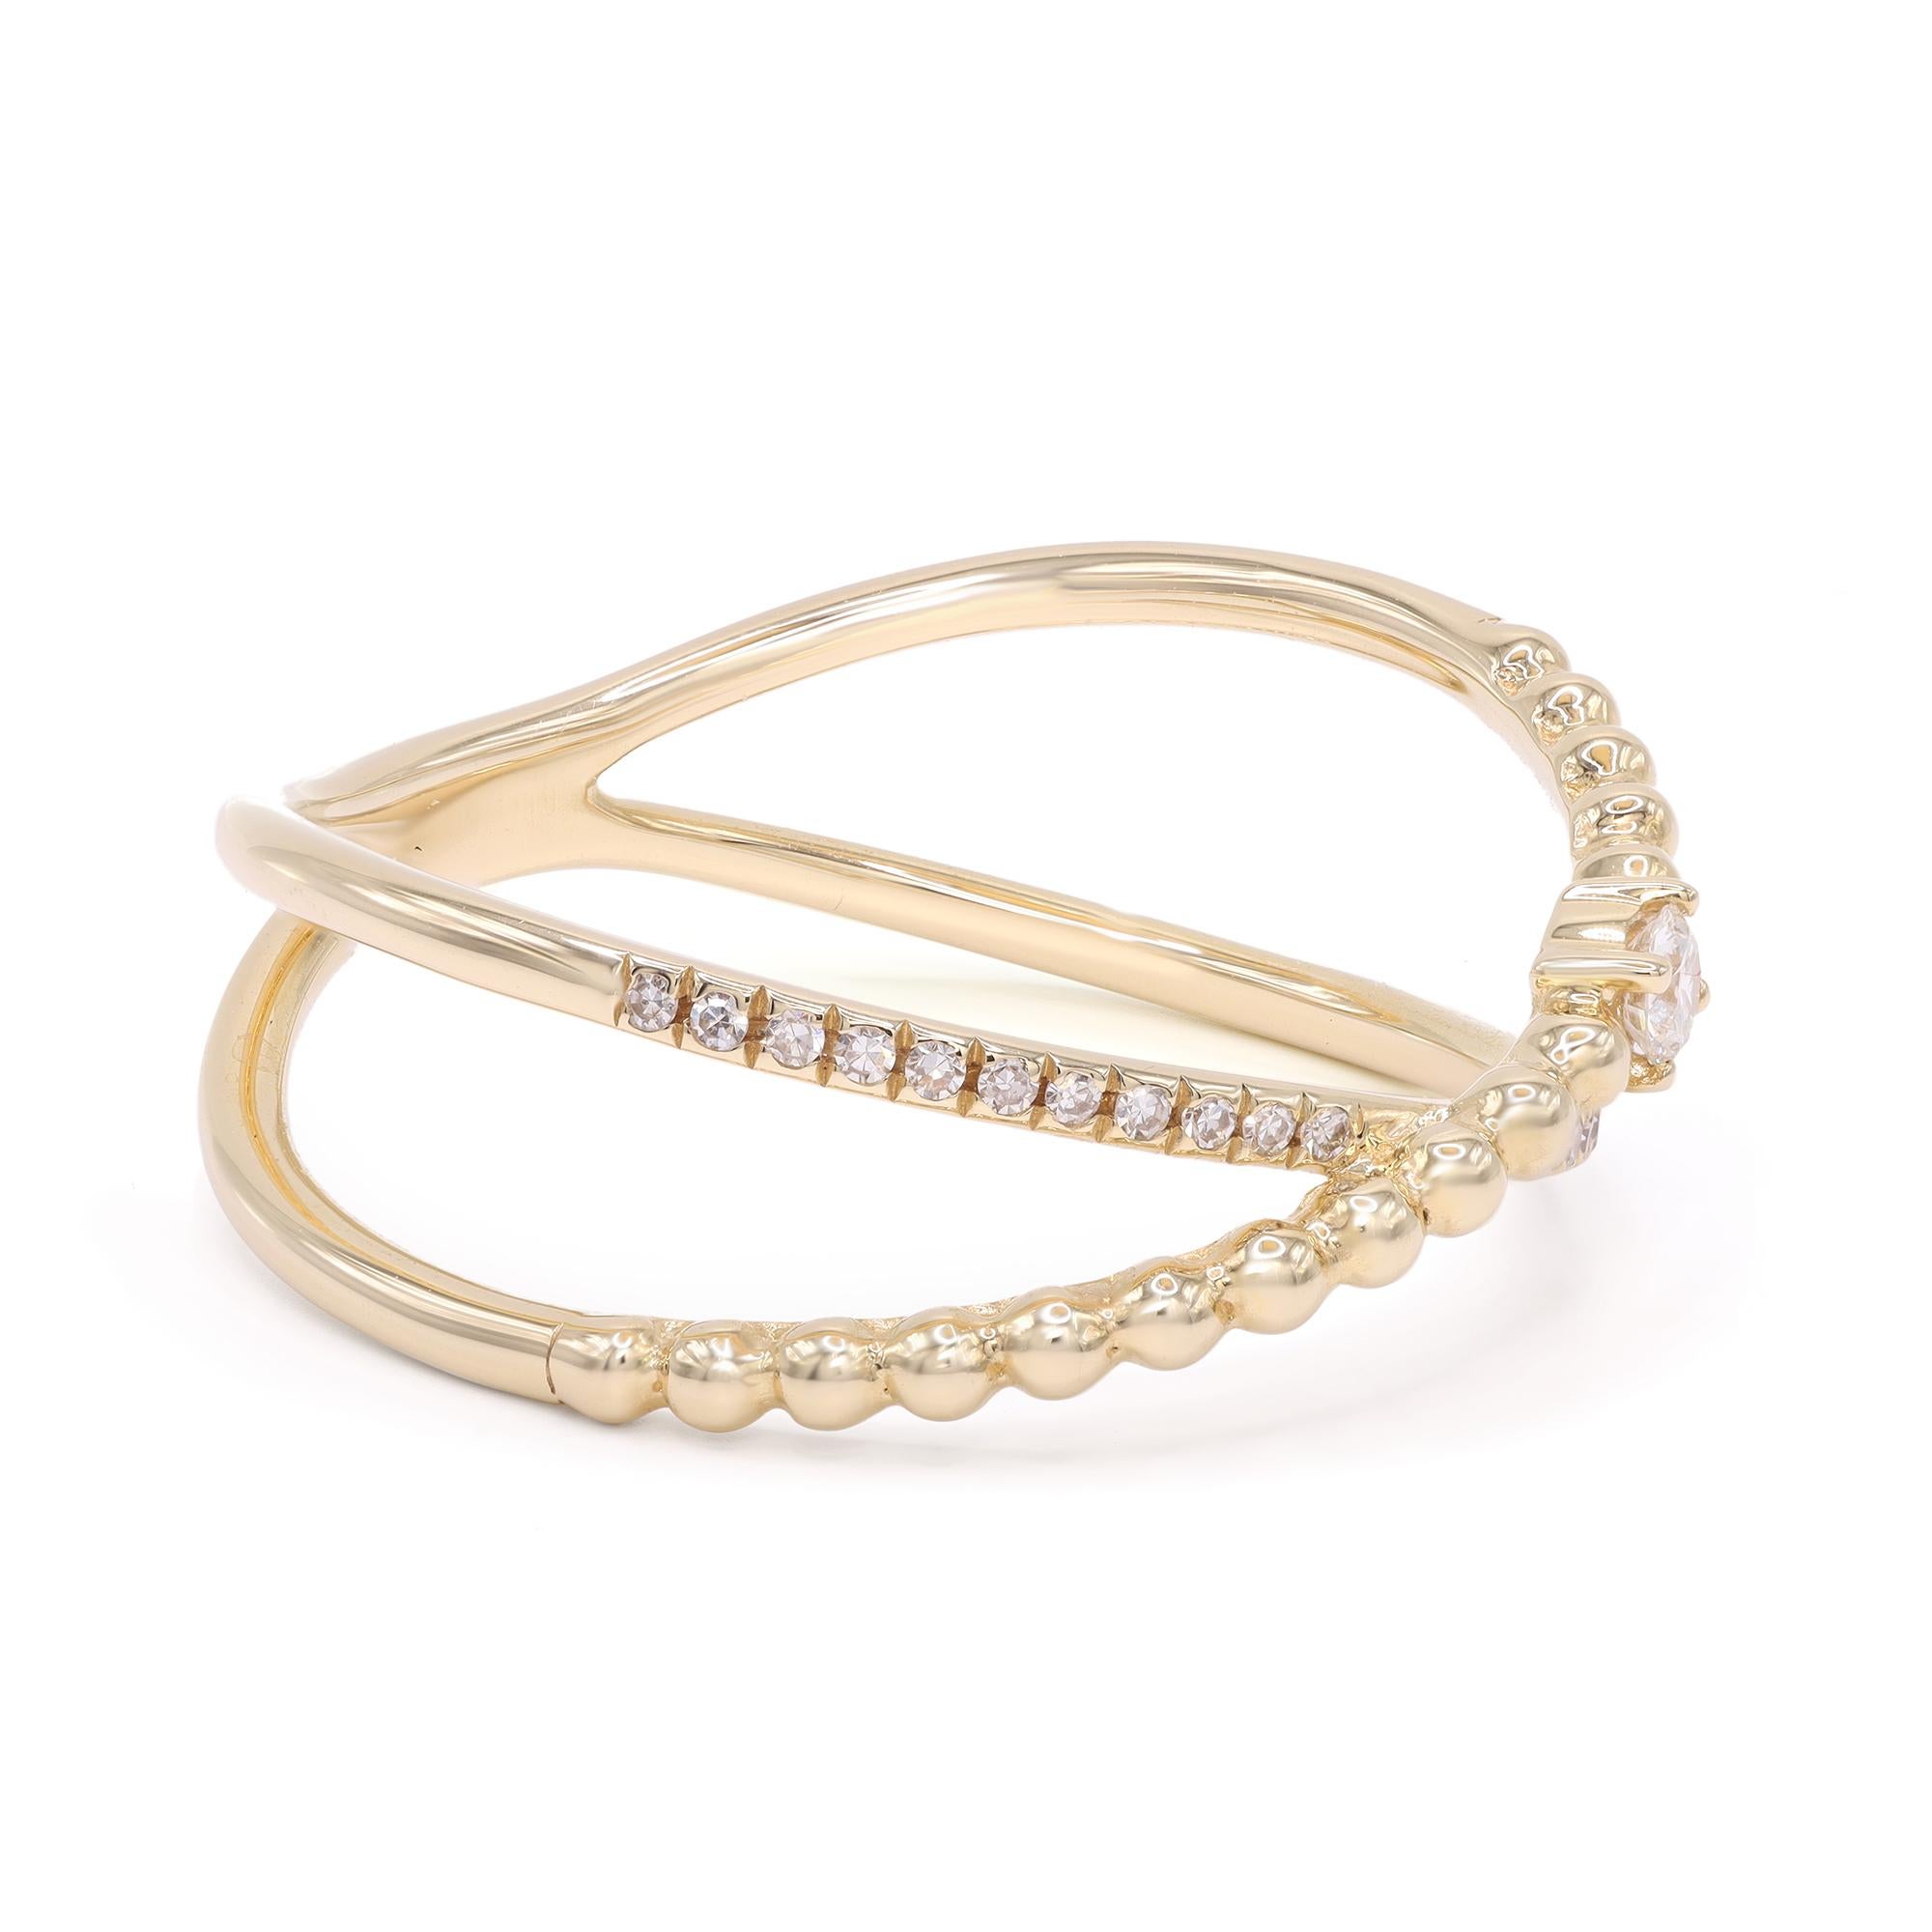 This beautiful 14k yellow gold X ring is accented by a petite line of pave round cut diamonds along with a gold bead line featuring a single round cut diamond. The total diamond carat weight is 0.12. Diamond color G-H and VS-SI clarity. Ring size 7.